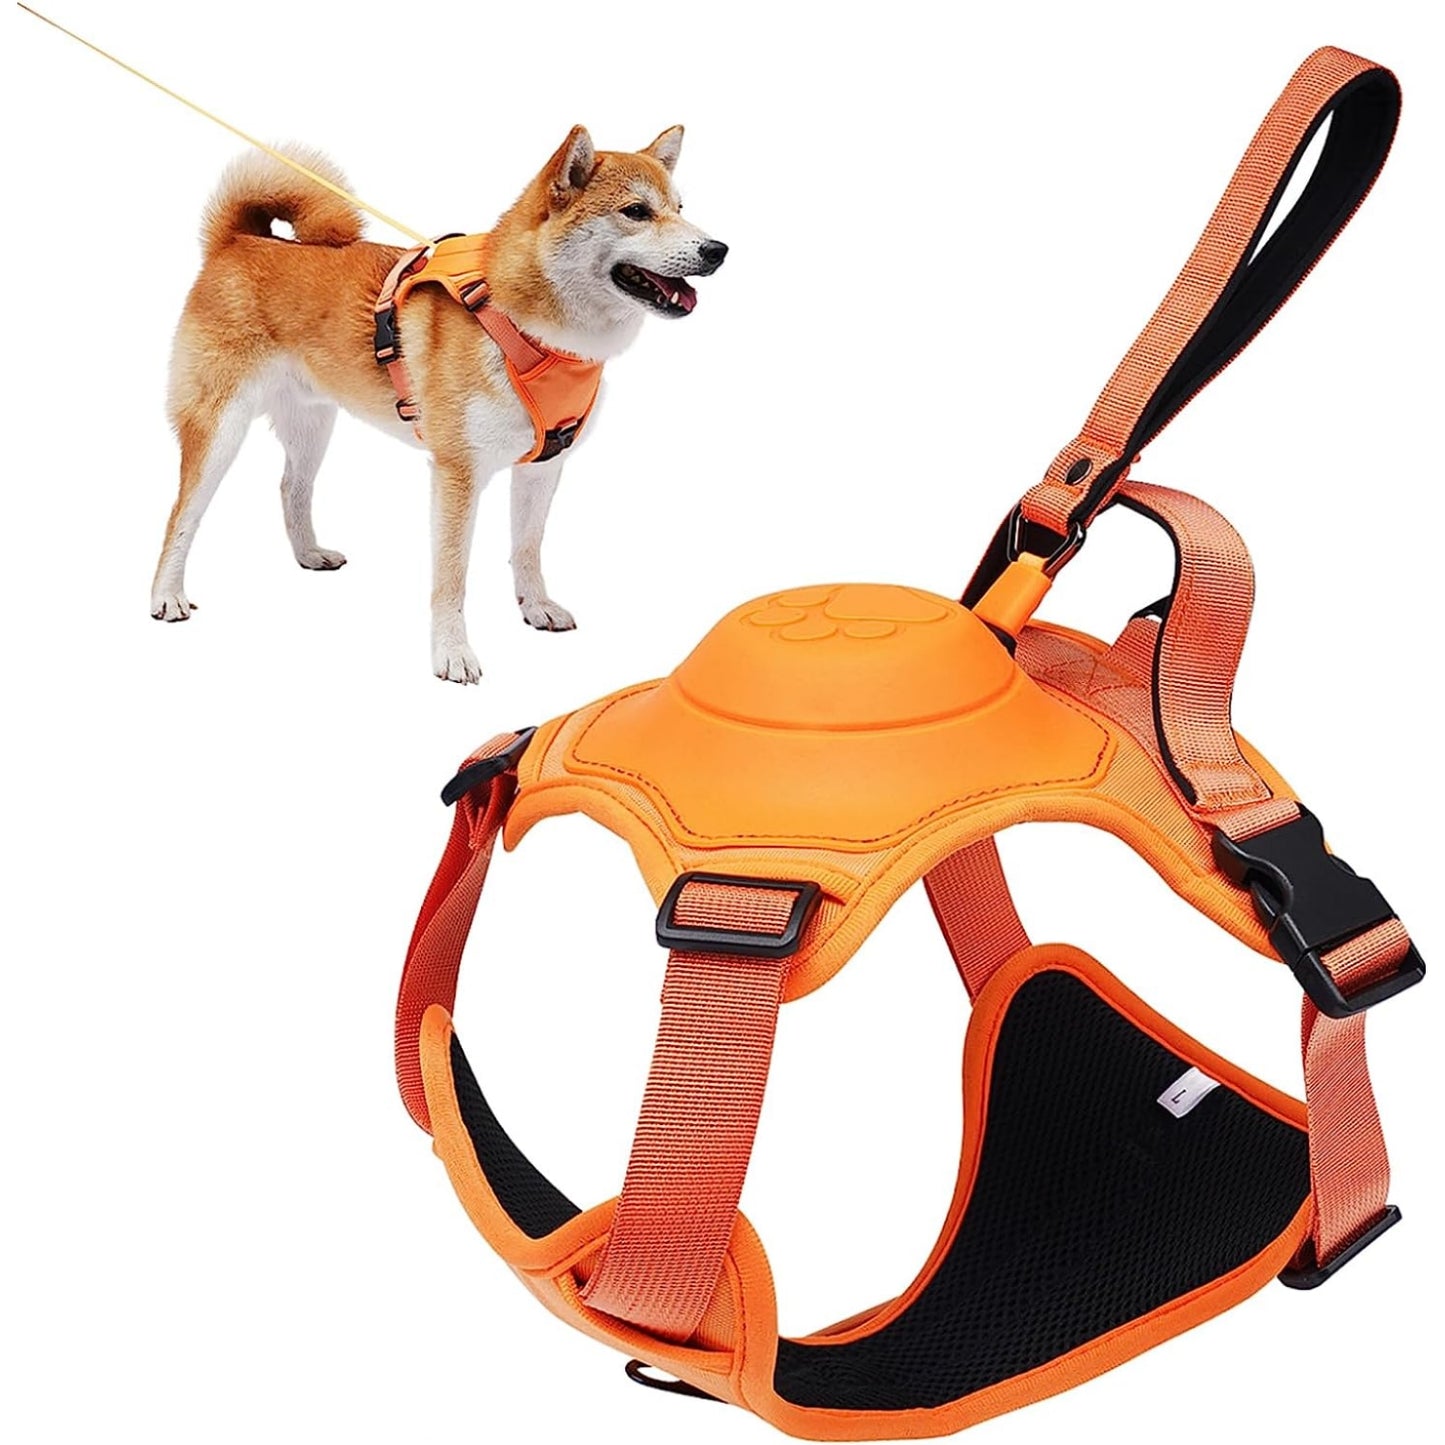 Dog Harness and Retractable Leash Set All-in-One